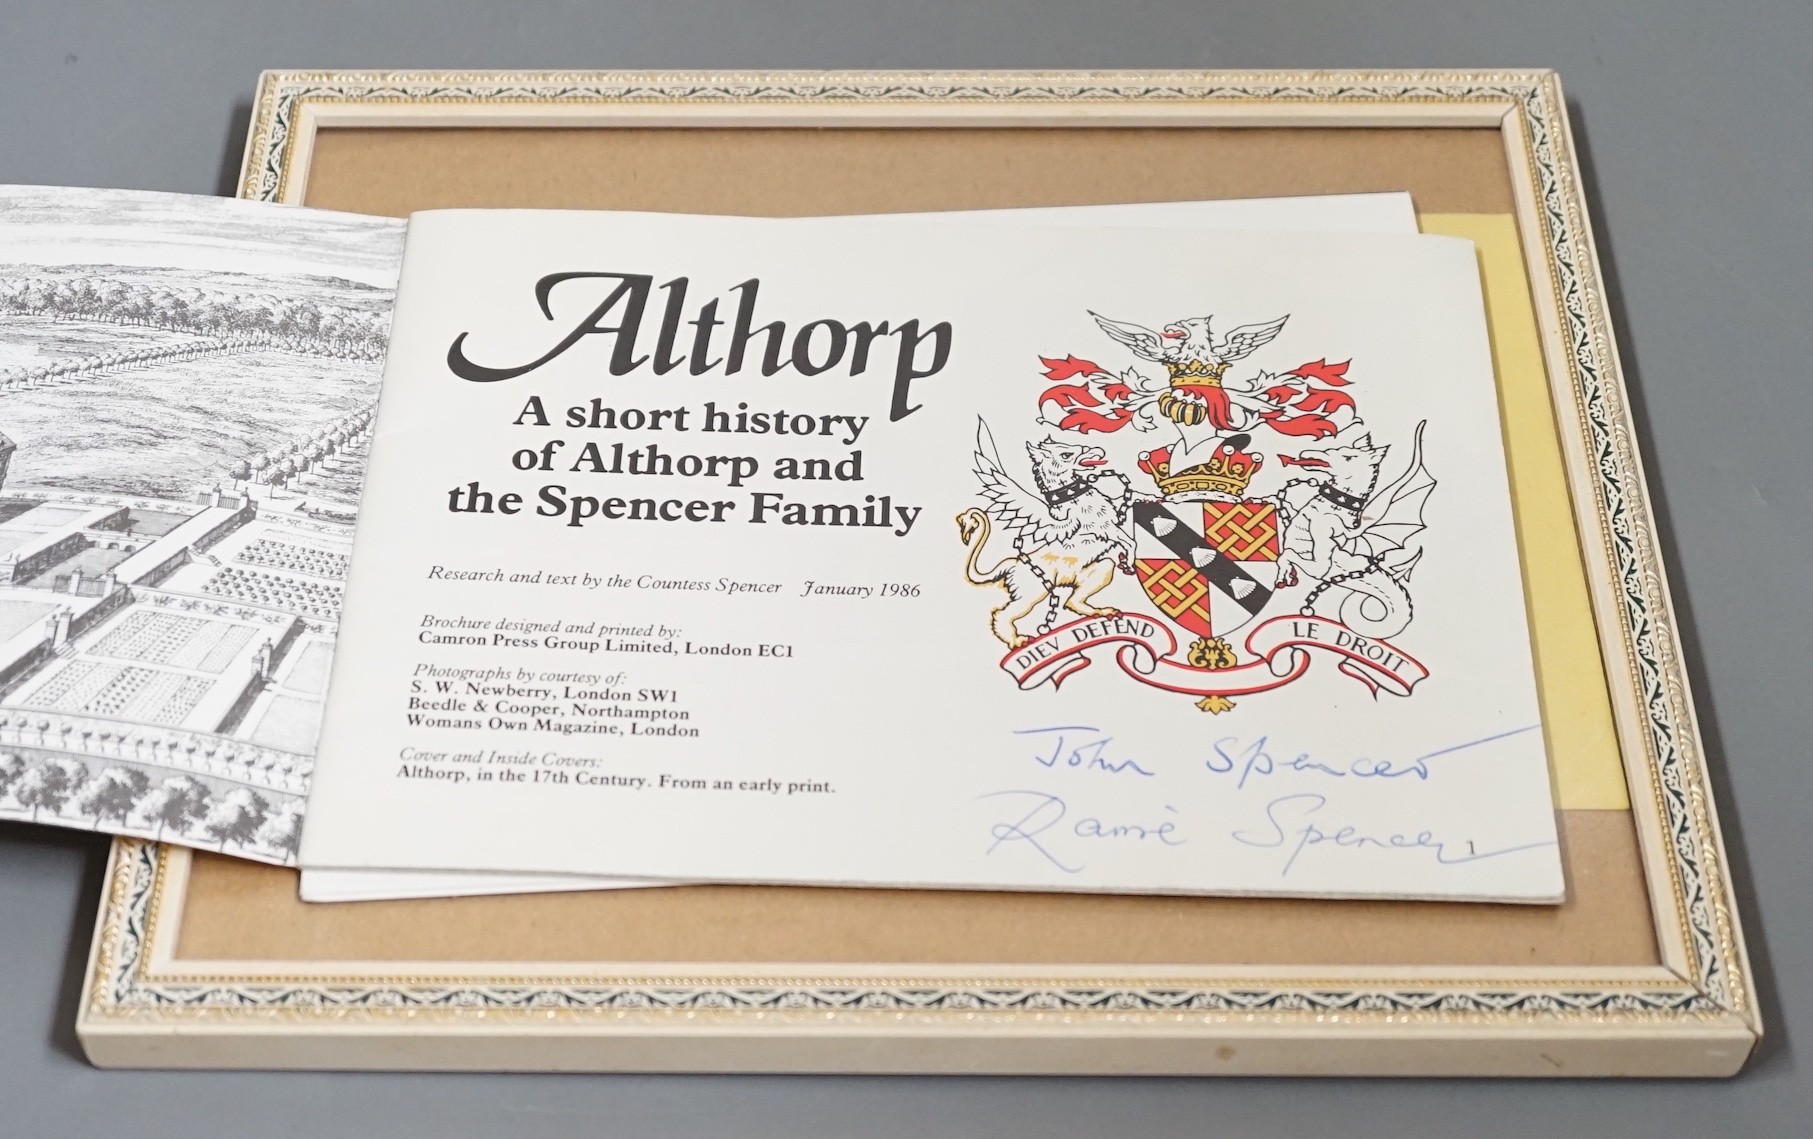 A Buckingham Palace Parking Permit, together with a Christmas card signed Charles Spencer and an Althorp booklet signed John Spencer and Raine Spencer